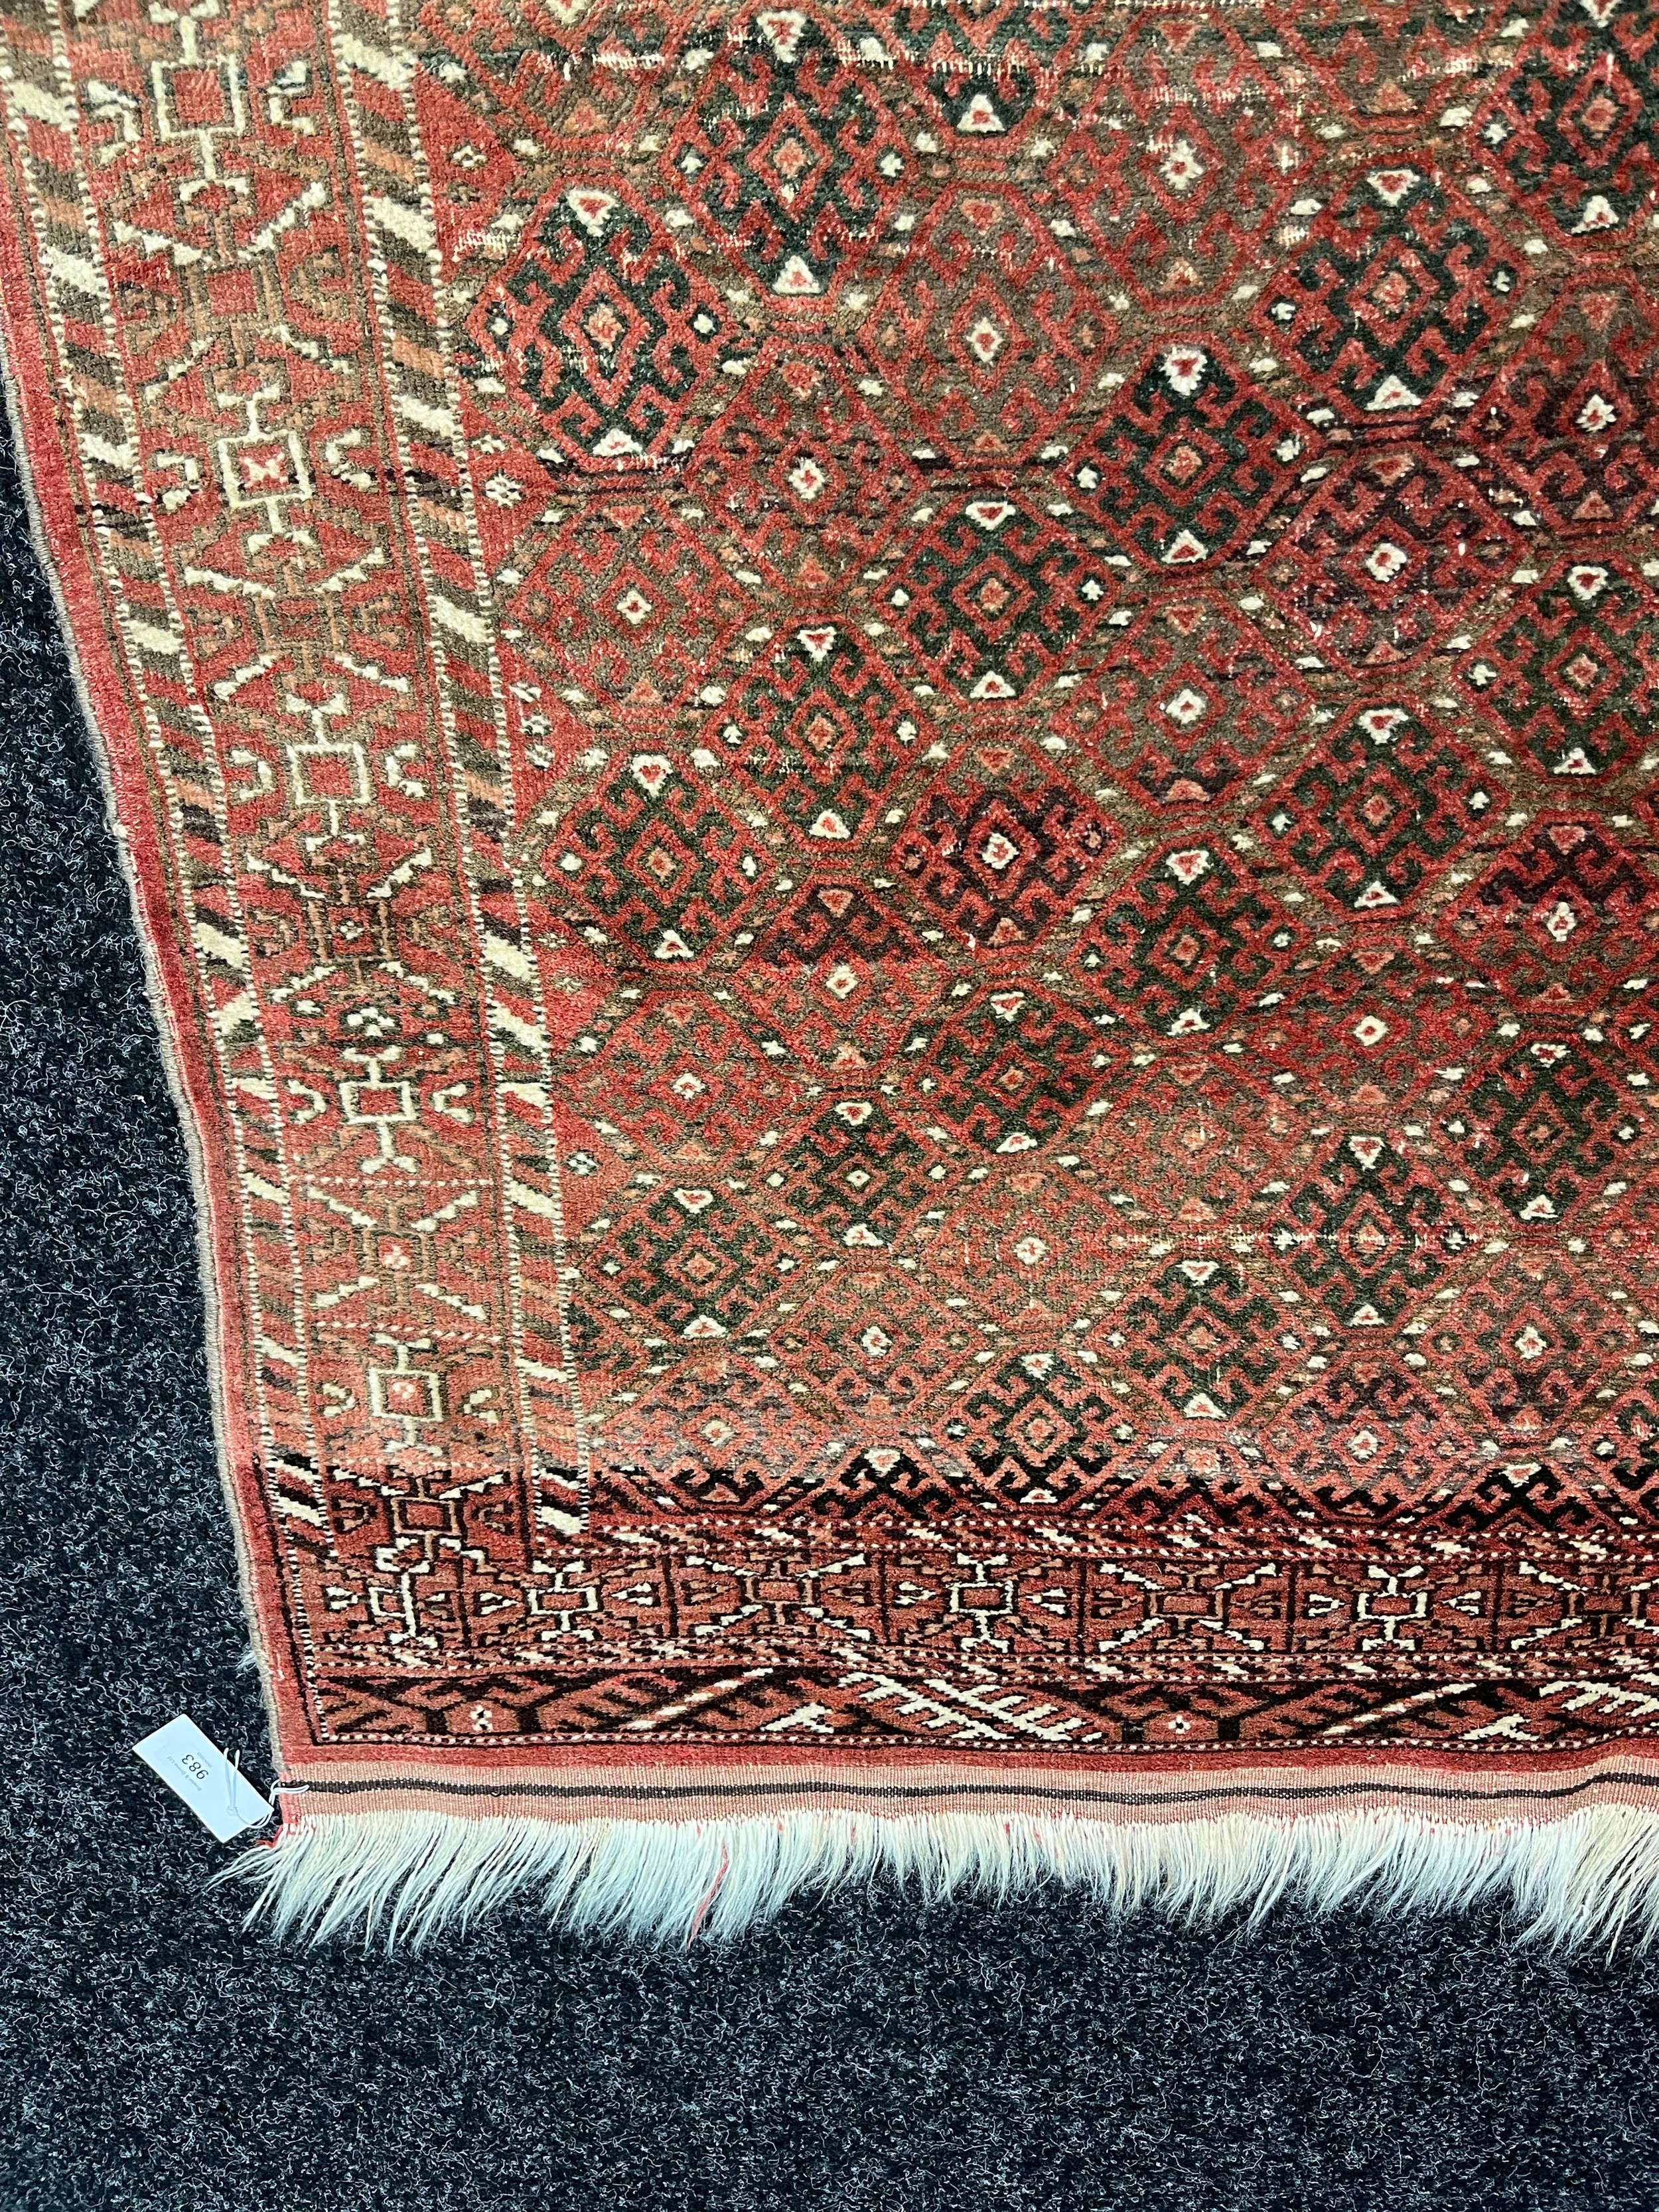 Indian hand made red ground ornate rug. [140x96cm] - Image 4 of 5